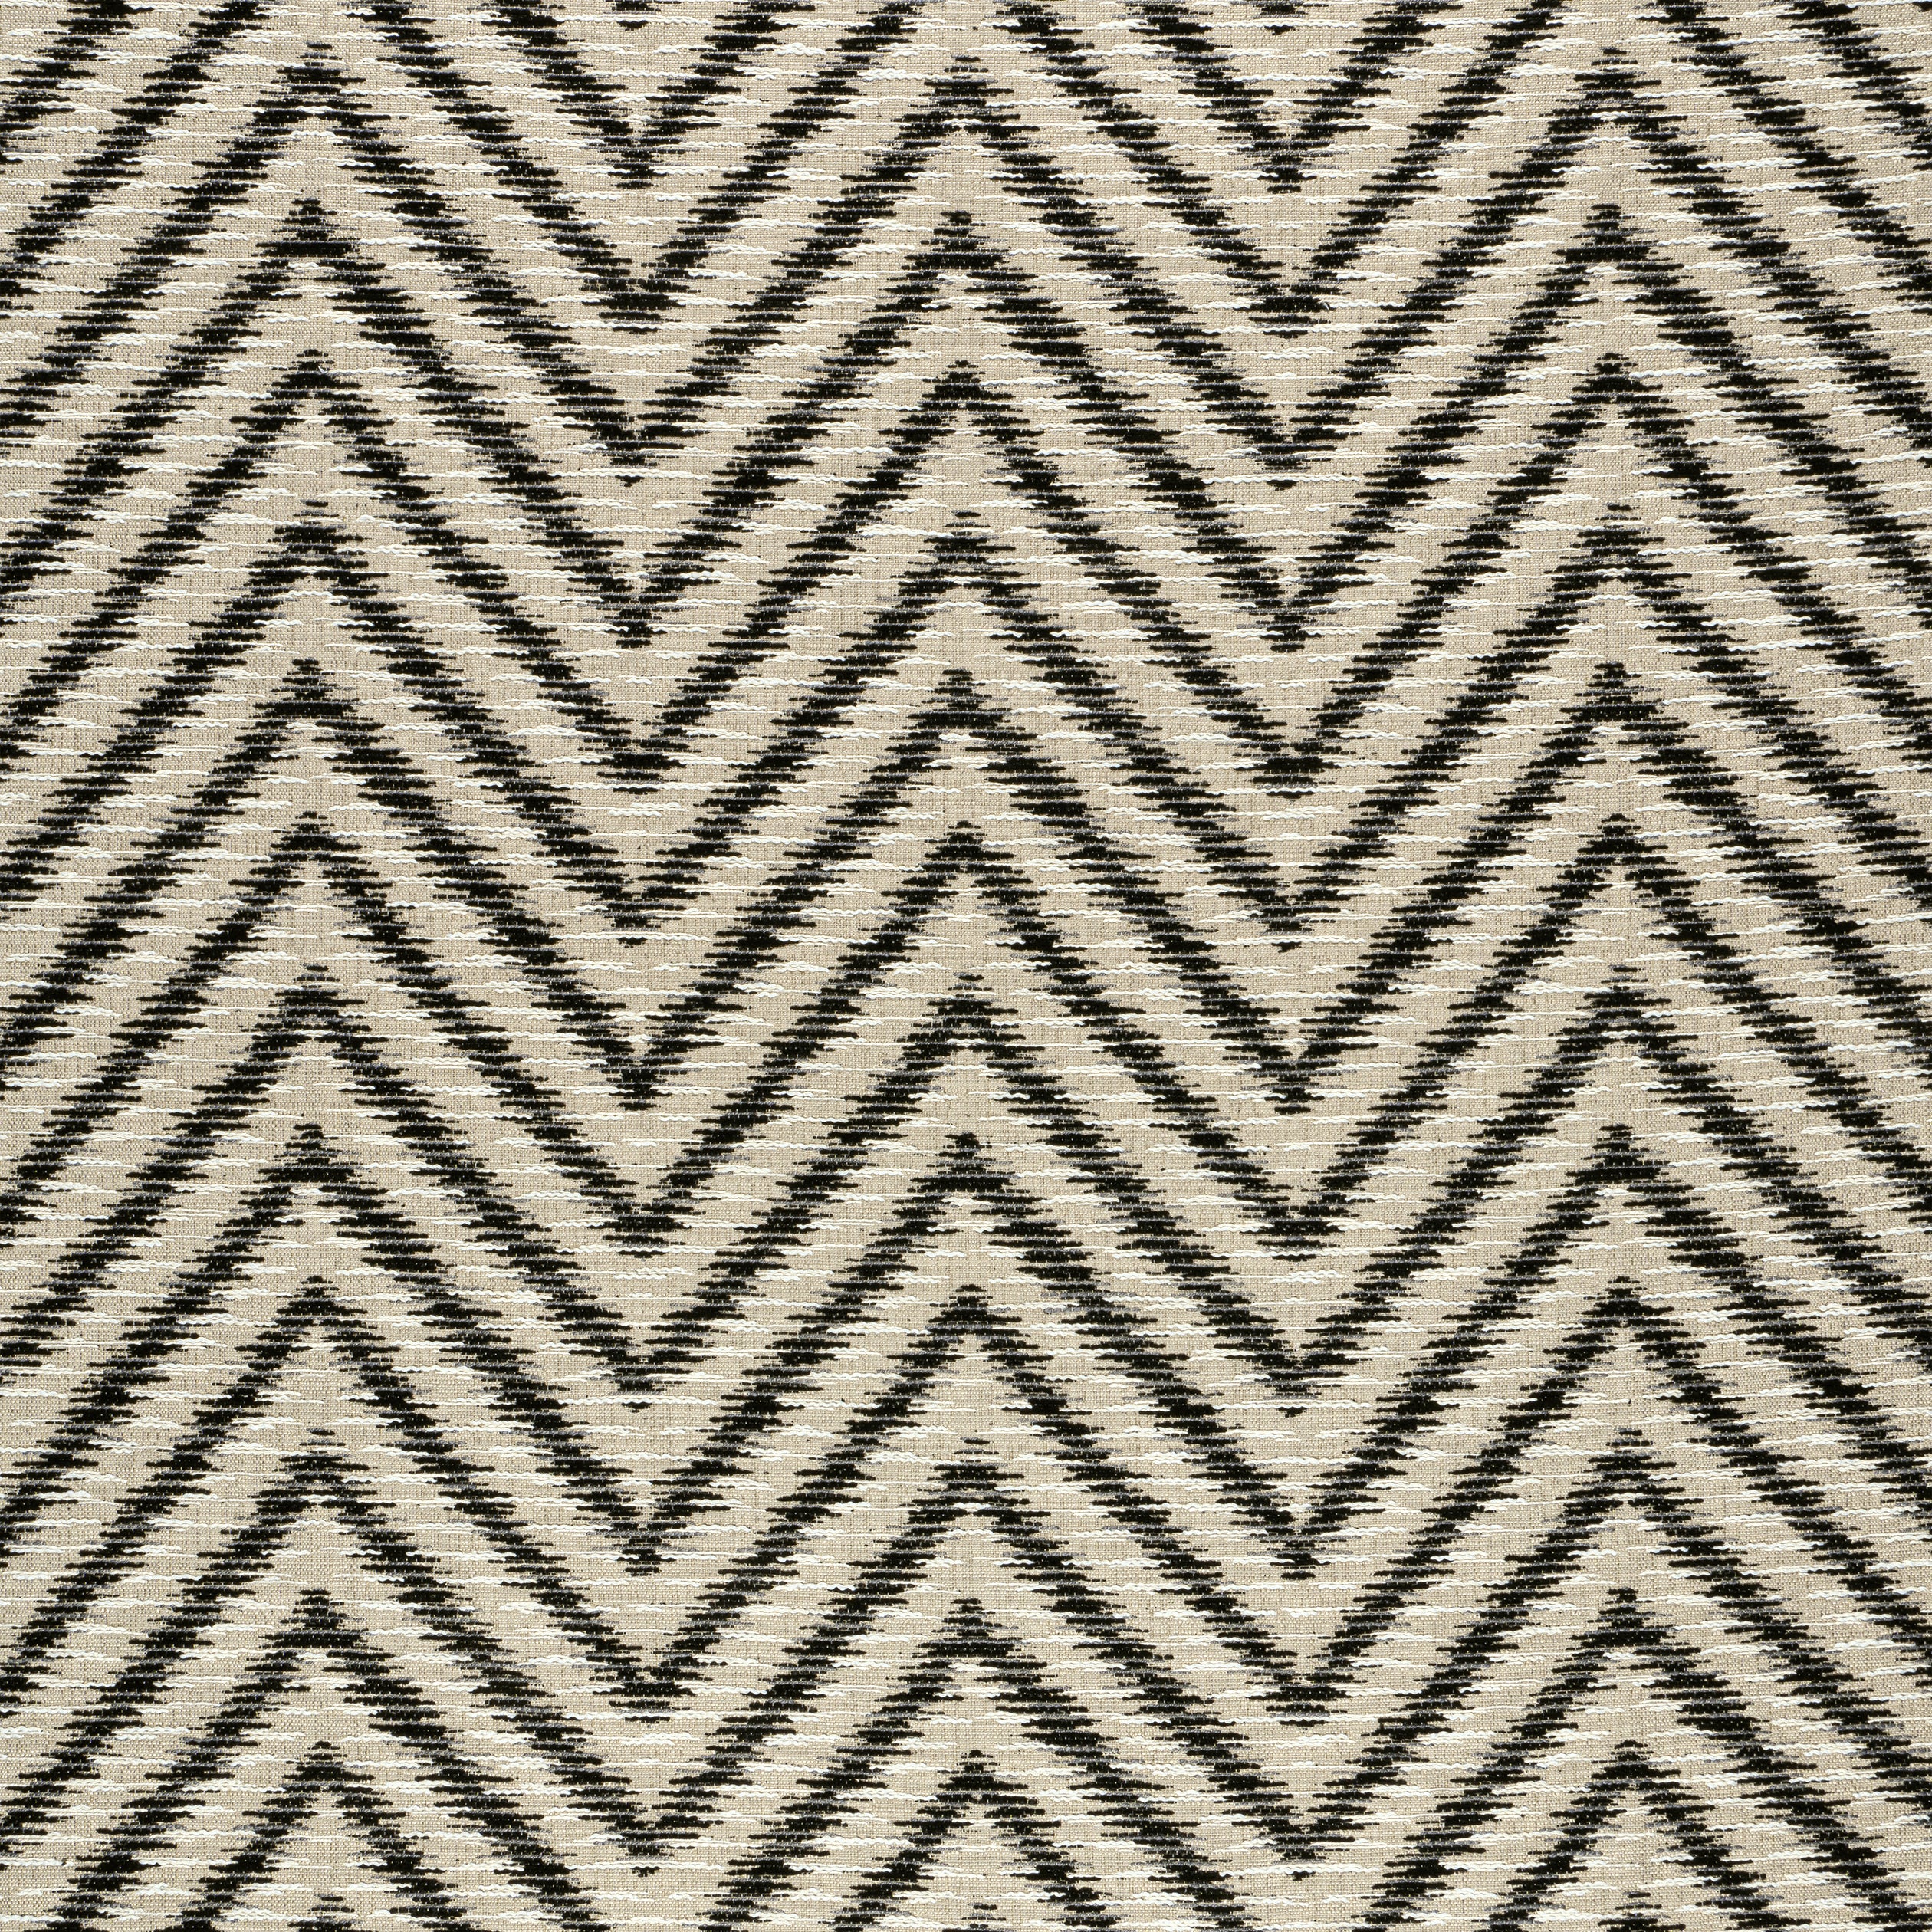 Aliso fabric in ebony color - pattern number W8824 - by Thibaut in the Haven collection